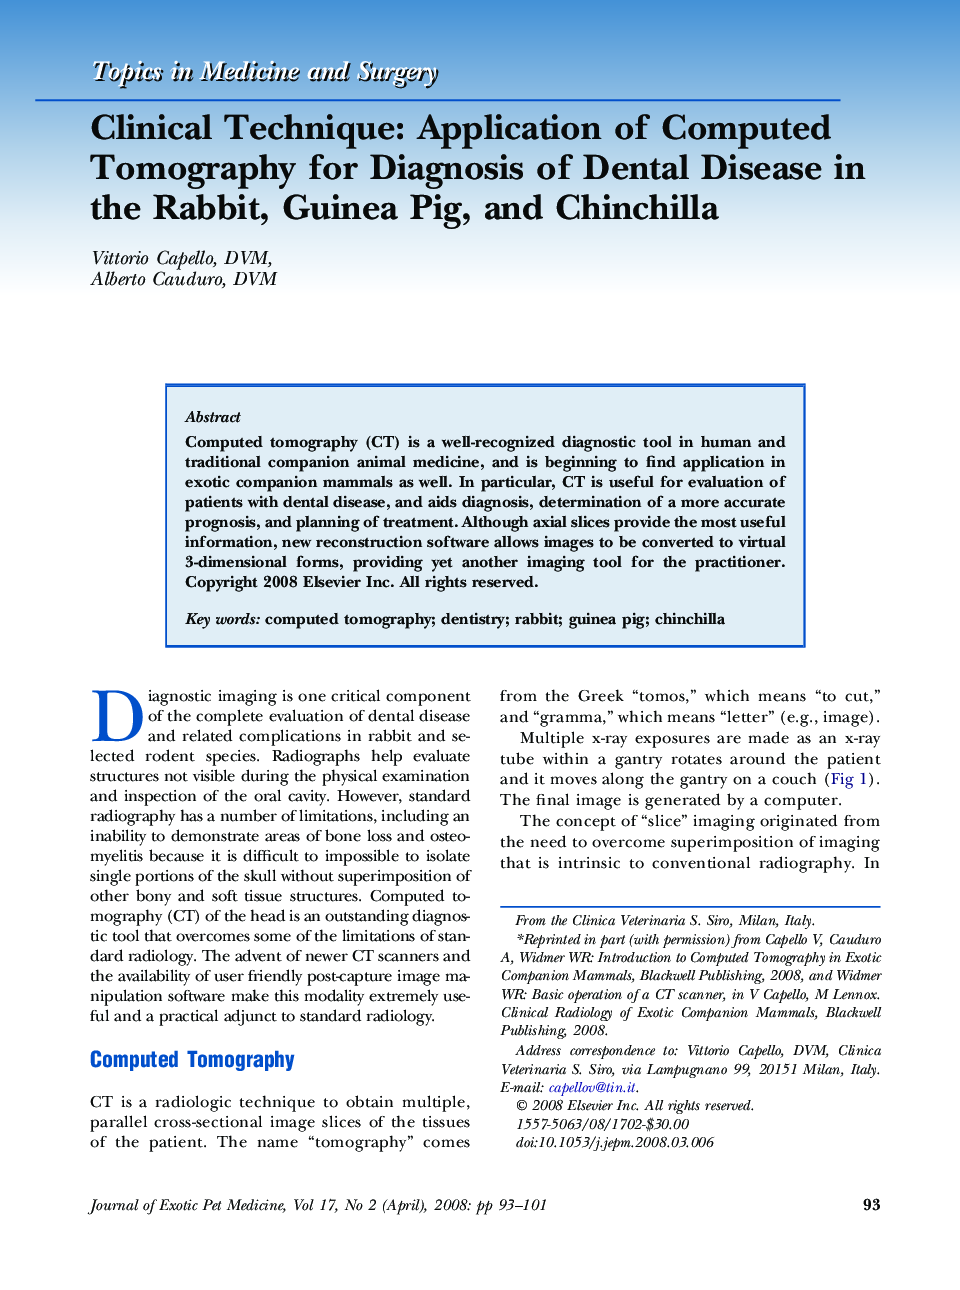 Clinical Technique: Application of Computed Tomography for Diagnosis of Dental Disease in the Rabbit, Guinea Pig, and Chinchilla ⁎